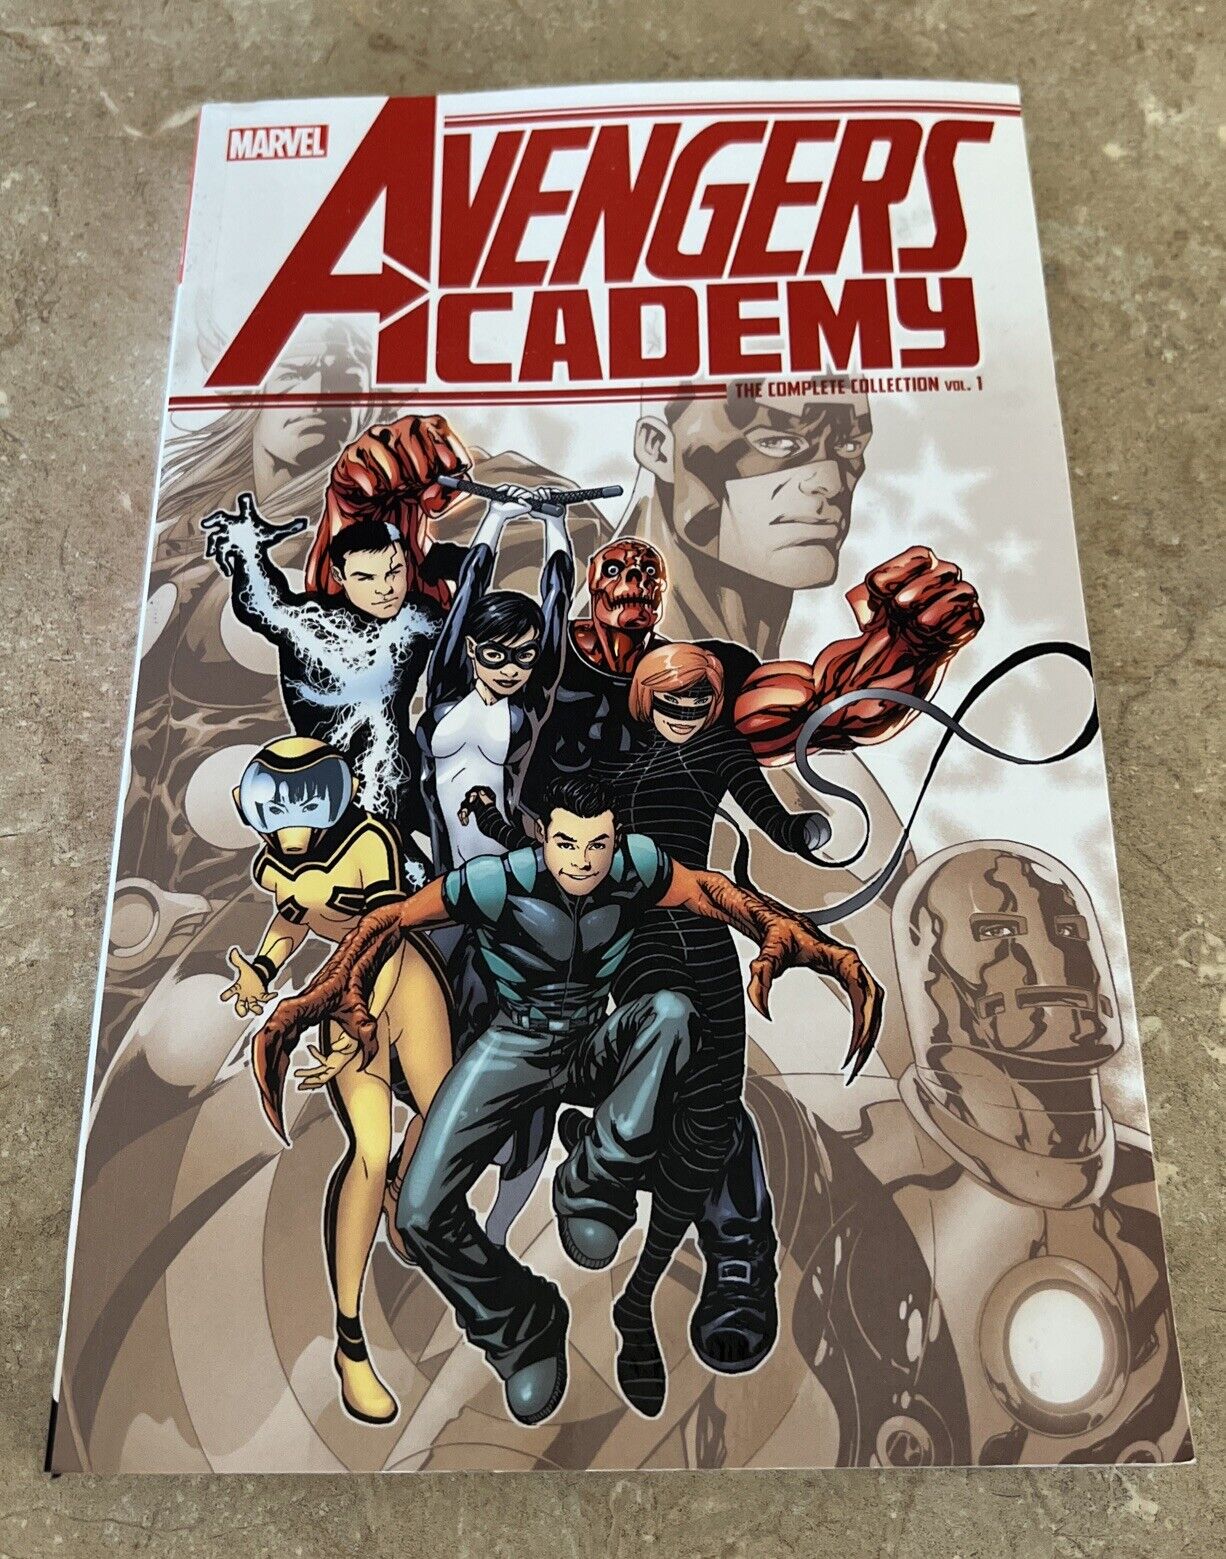 AVENGERS ACADEMY: THE COMPLETE COLLECTION VOL. 1 By Christos Gage & Paul Tobin